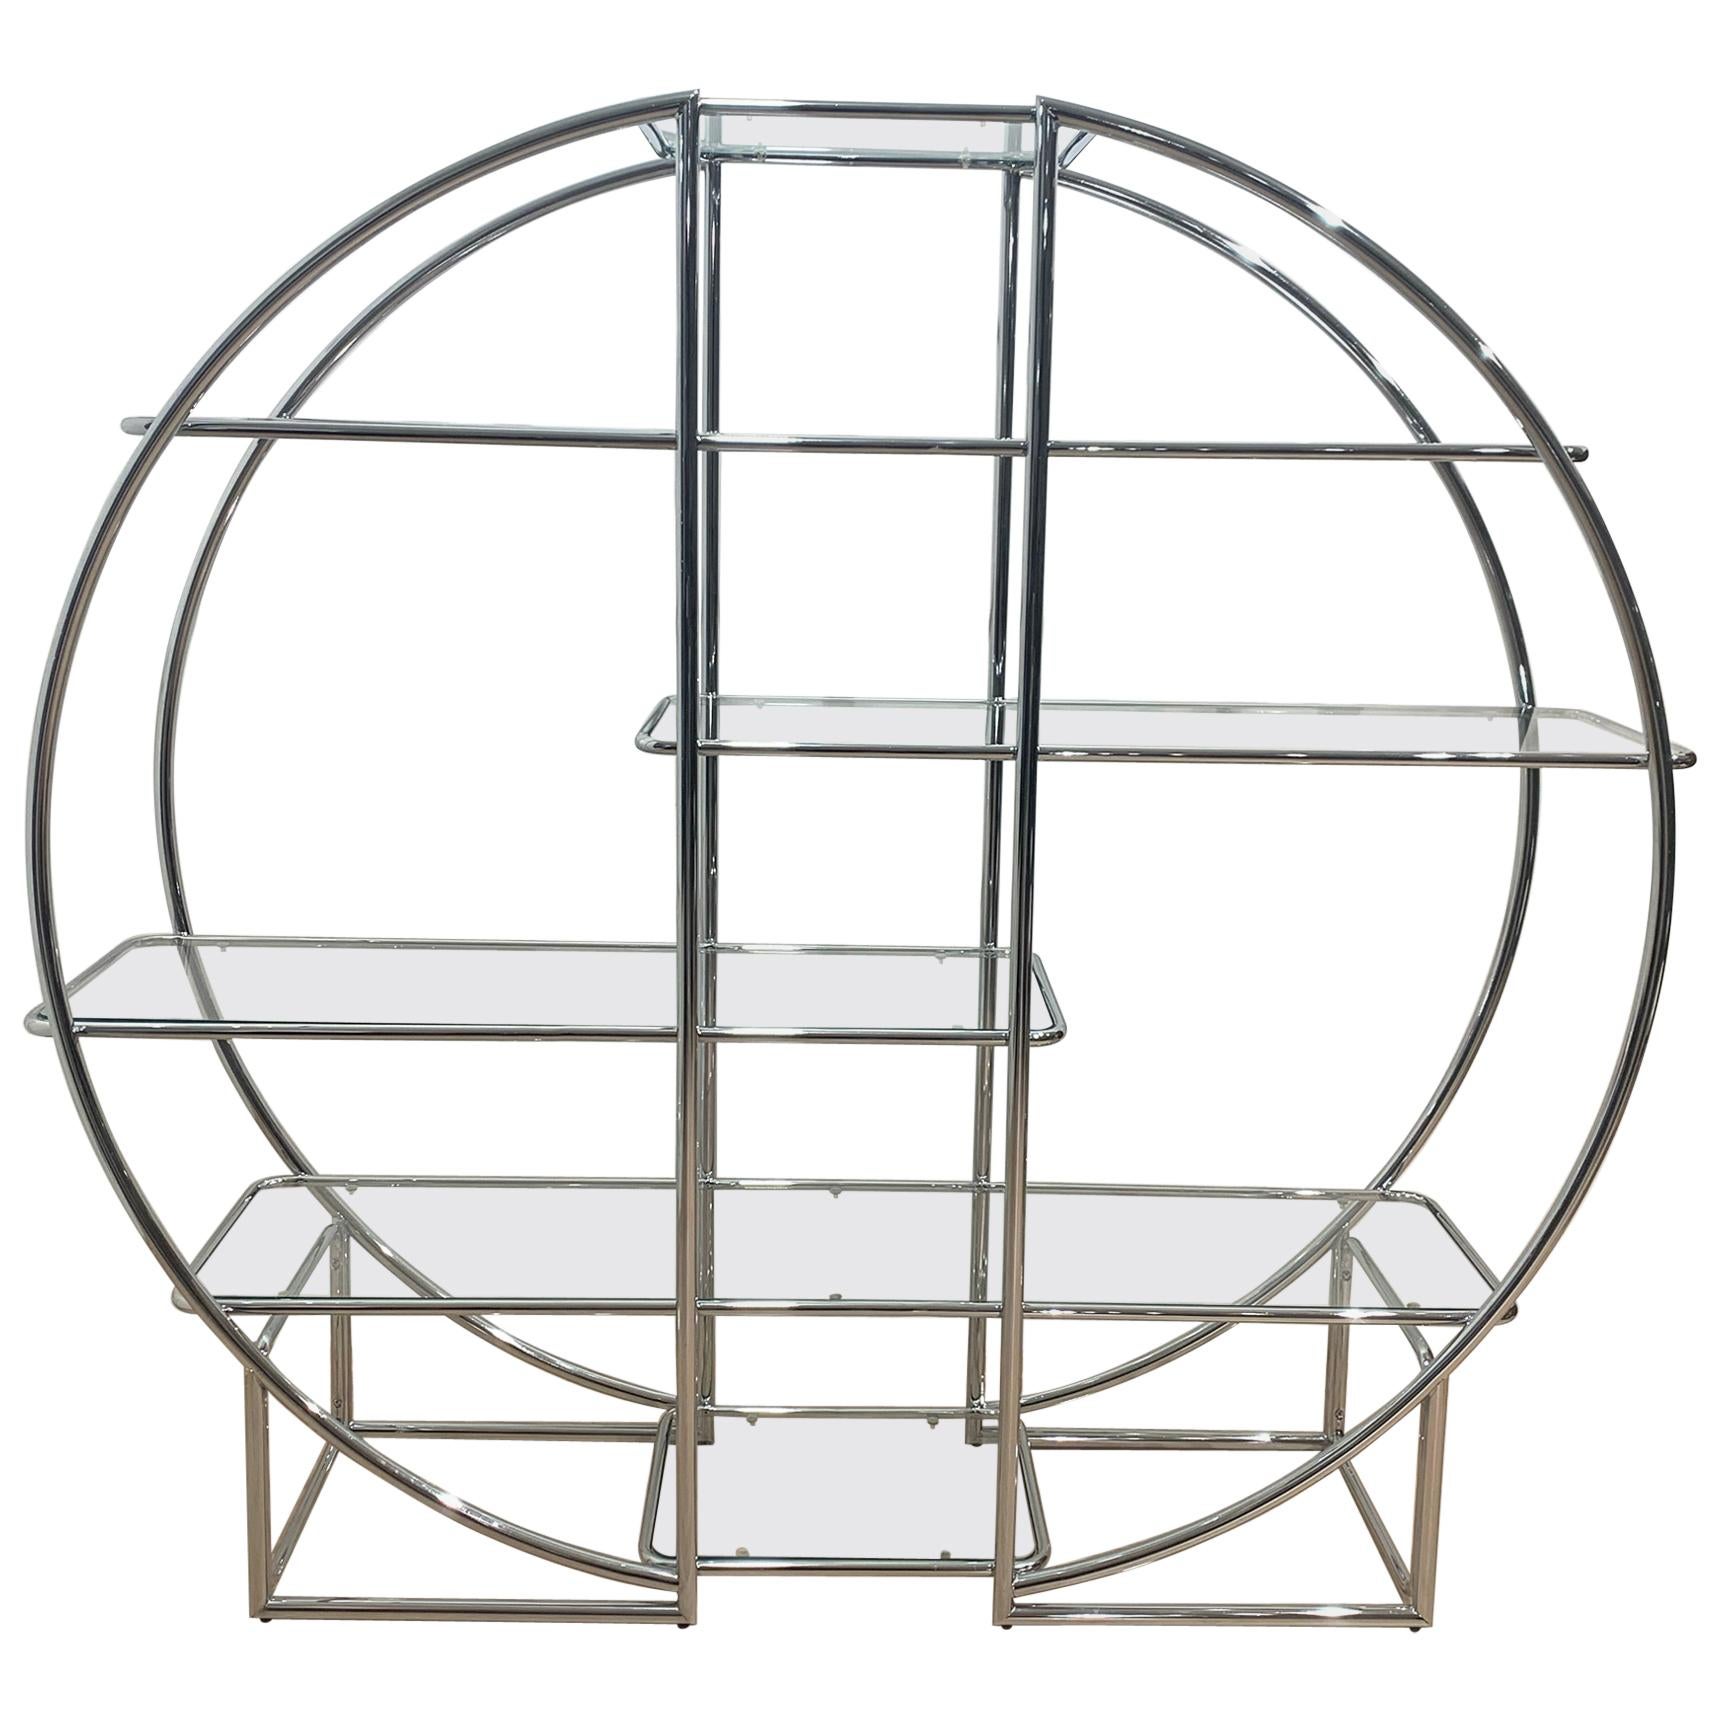 Bauhaus Style Shelf, Chromed Steeltubes and Glass, Germany, 1950-70s For Sale